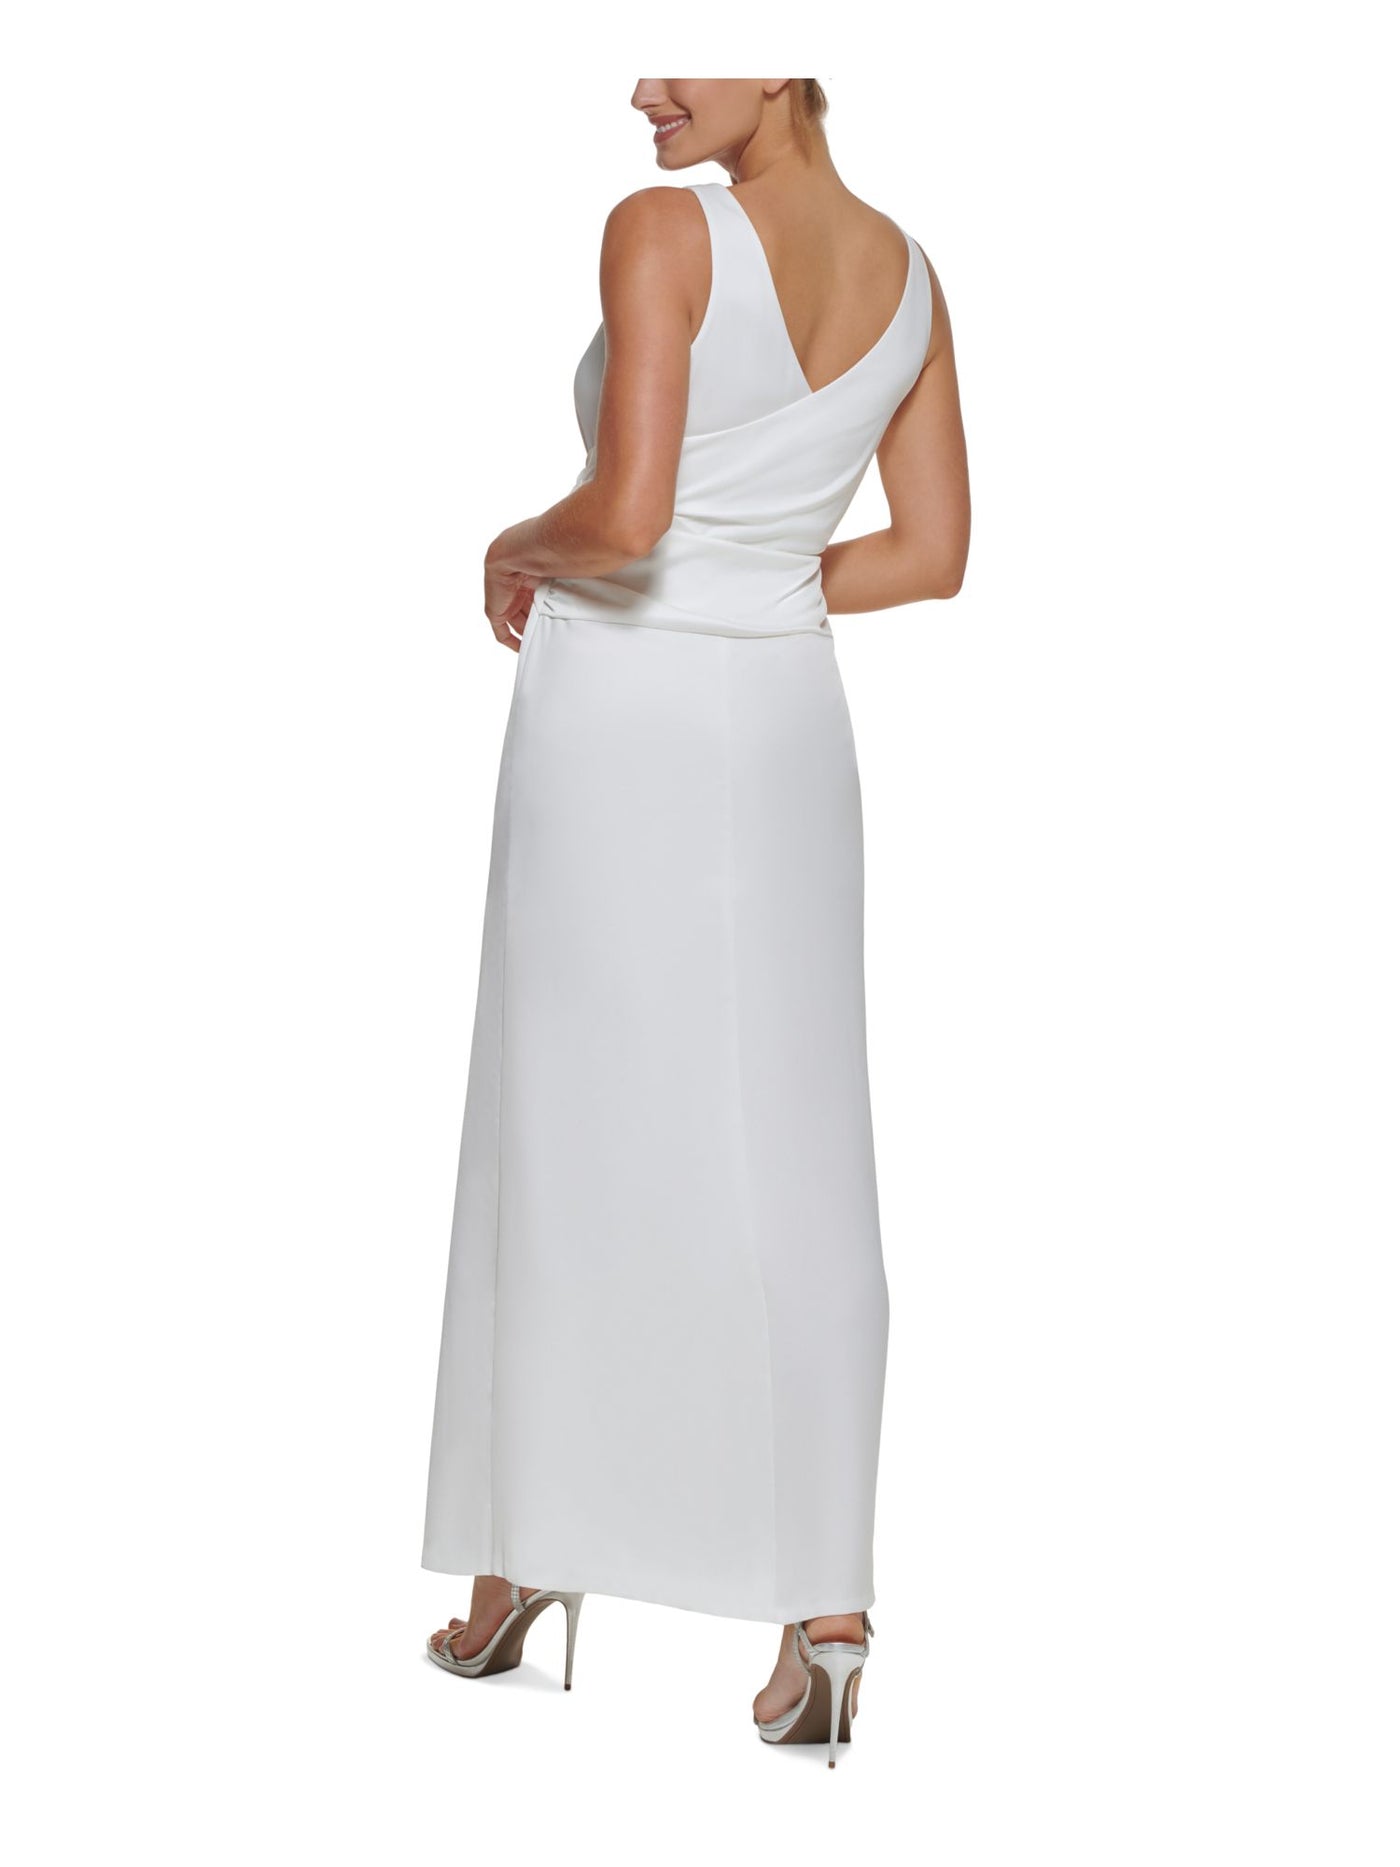 DKNY Womens Ivory Ruched Zippered Knotted Front Slitted Sleeveless Surplice Neckline Full-Length Formal Gown Dress 10